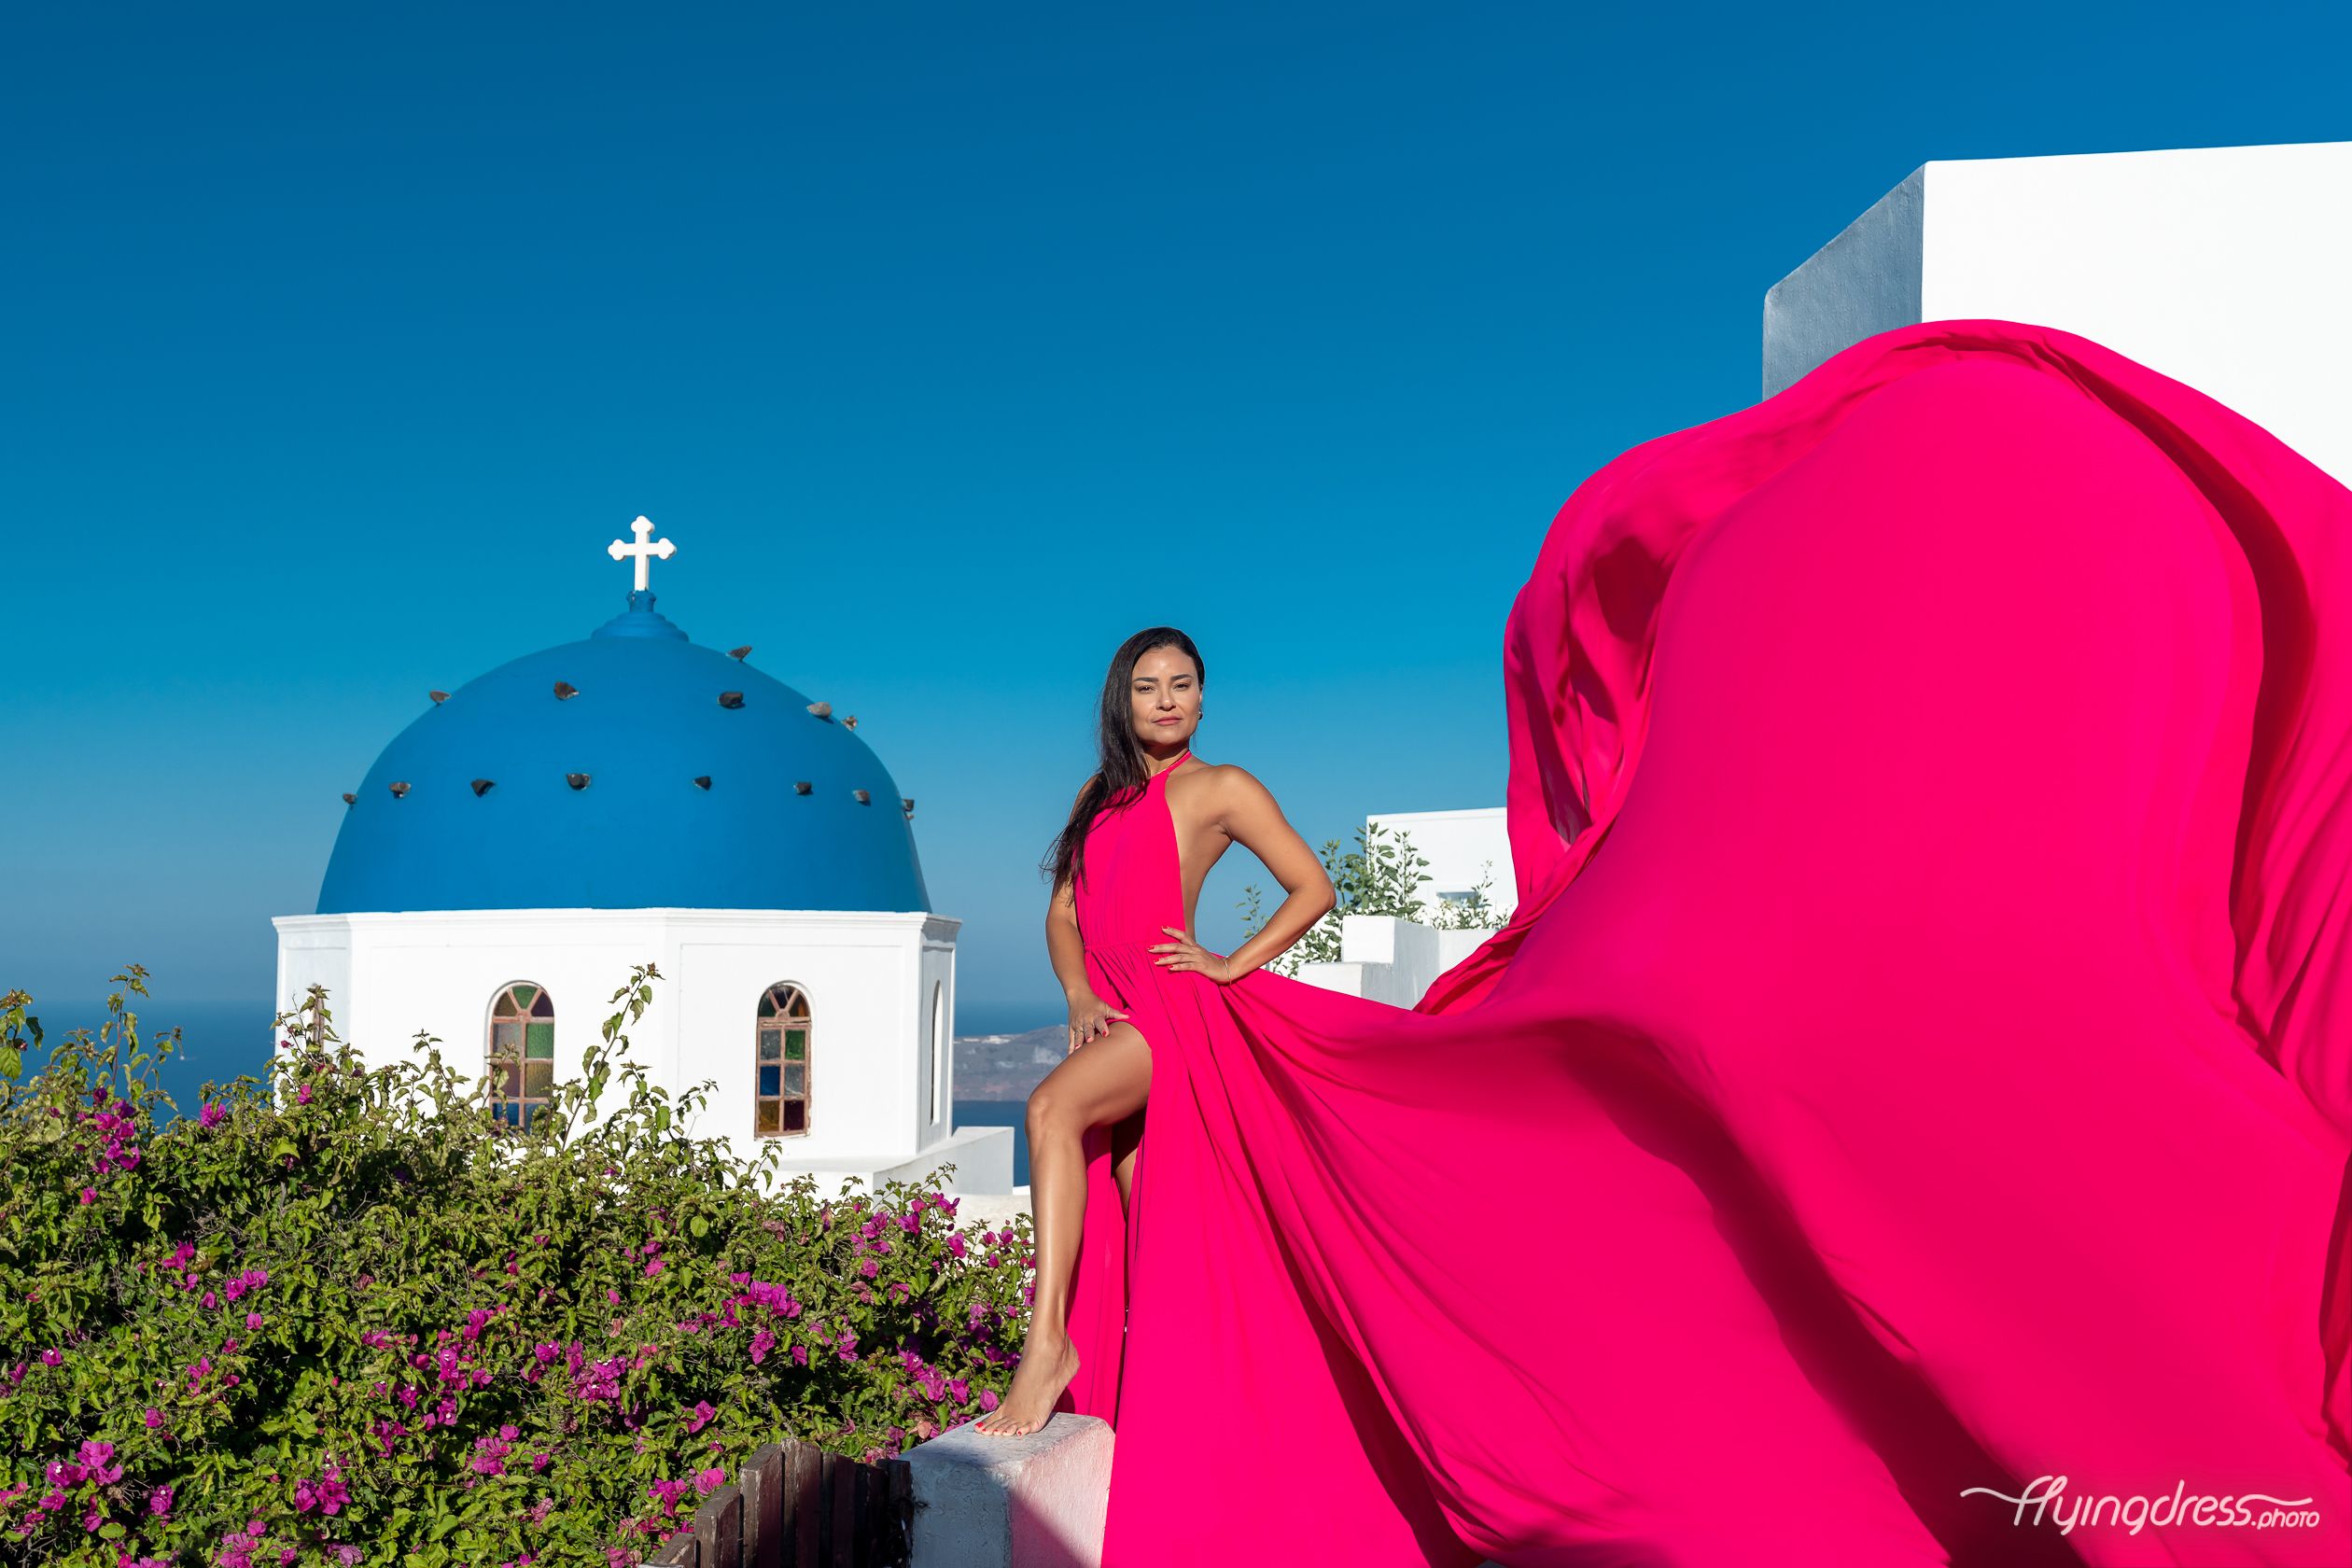 A vision of elegance and grace, the lady's fuchsia pink flying dress dances harmoniously with the wind, painting a striking picture against Santorini's backdrop.